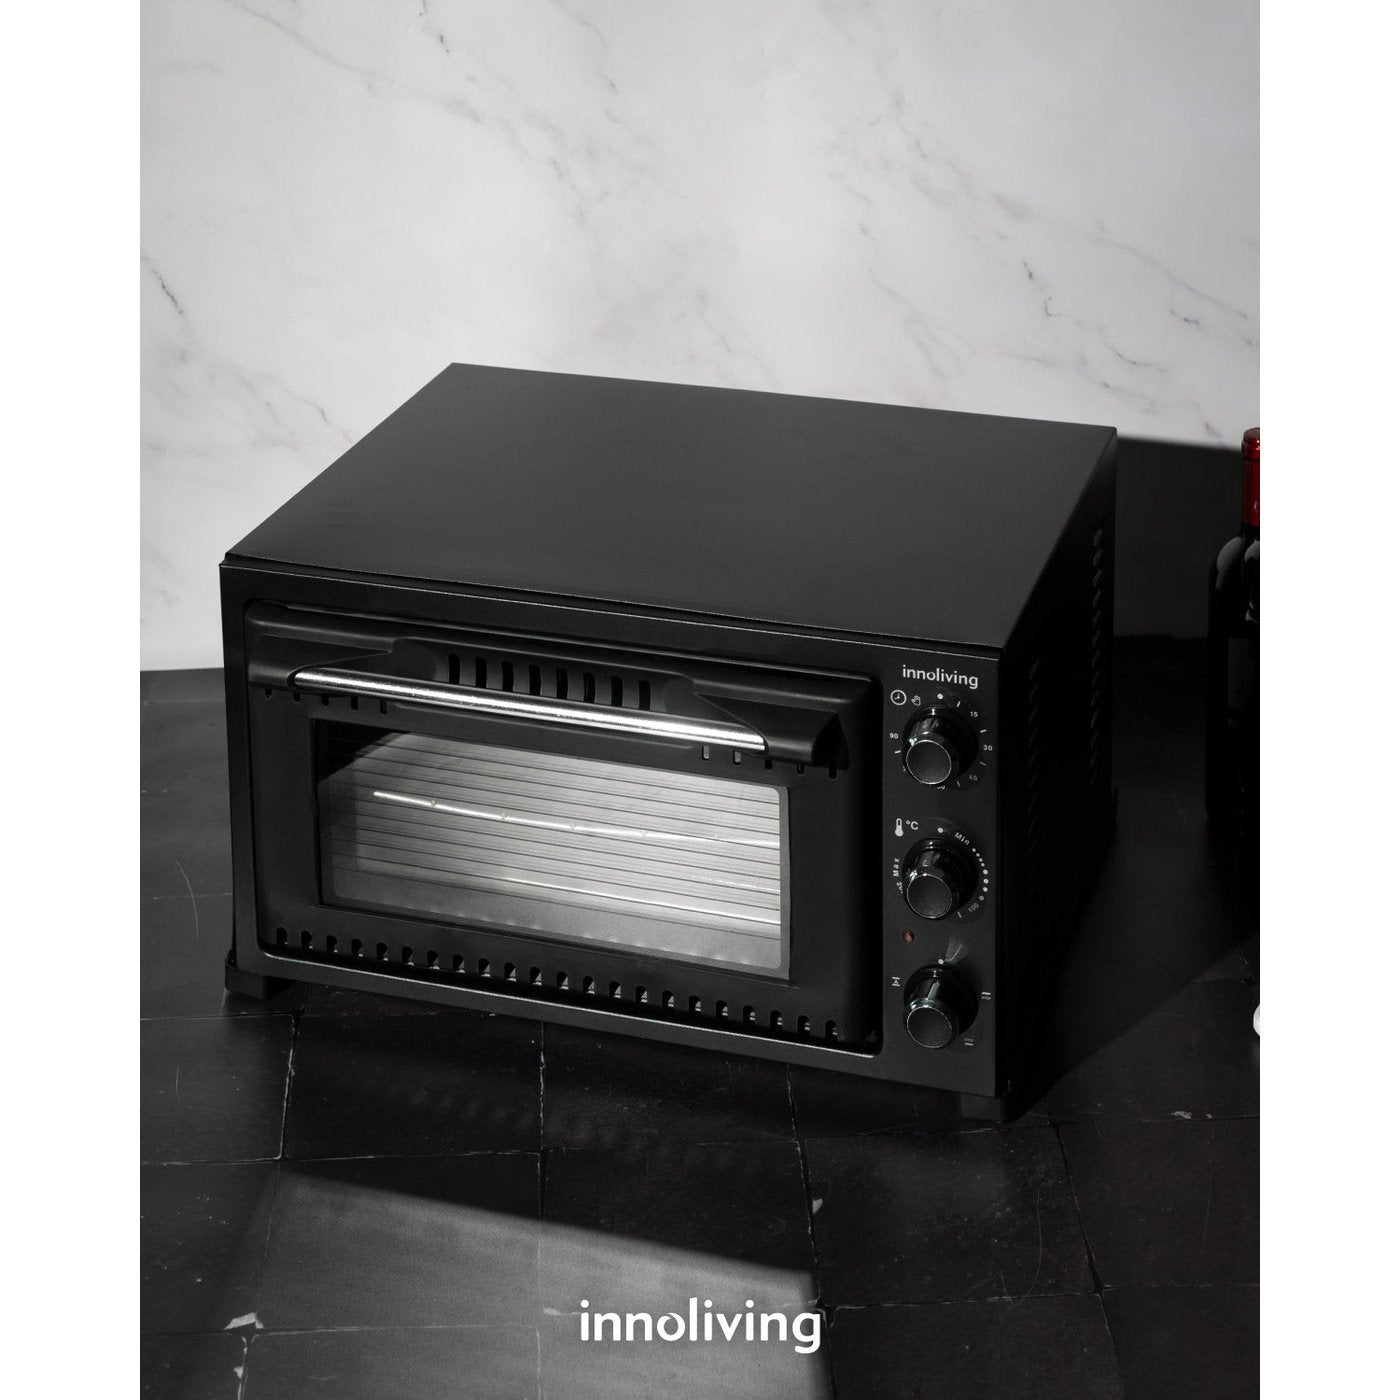 Electric convection oven 32 liters with timer trays and internal light, Innoliving INN-794